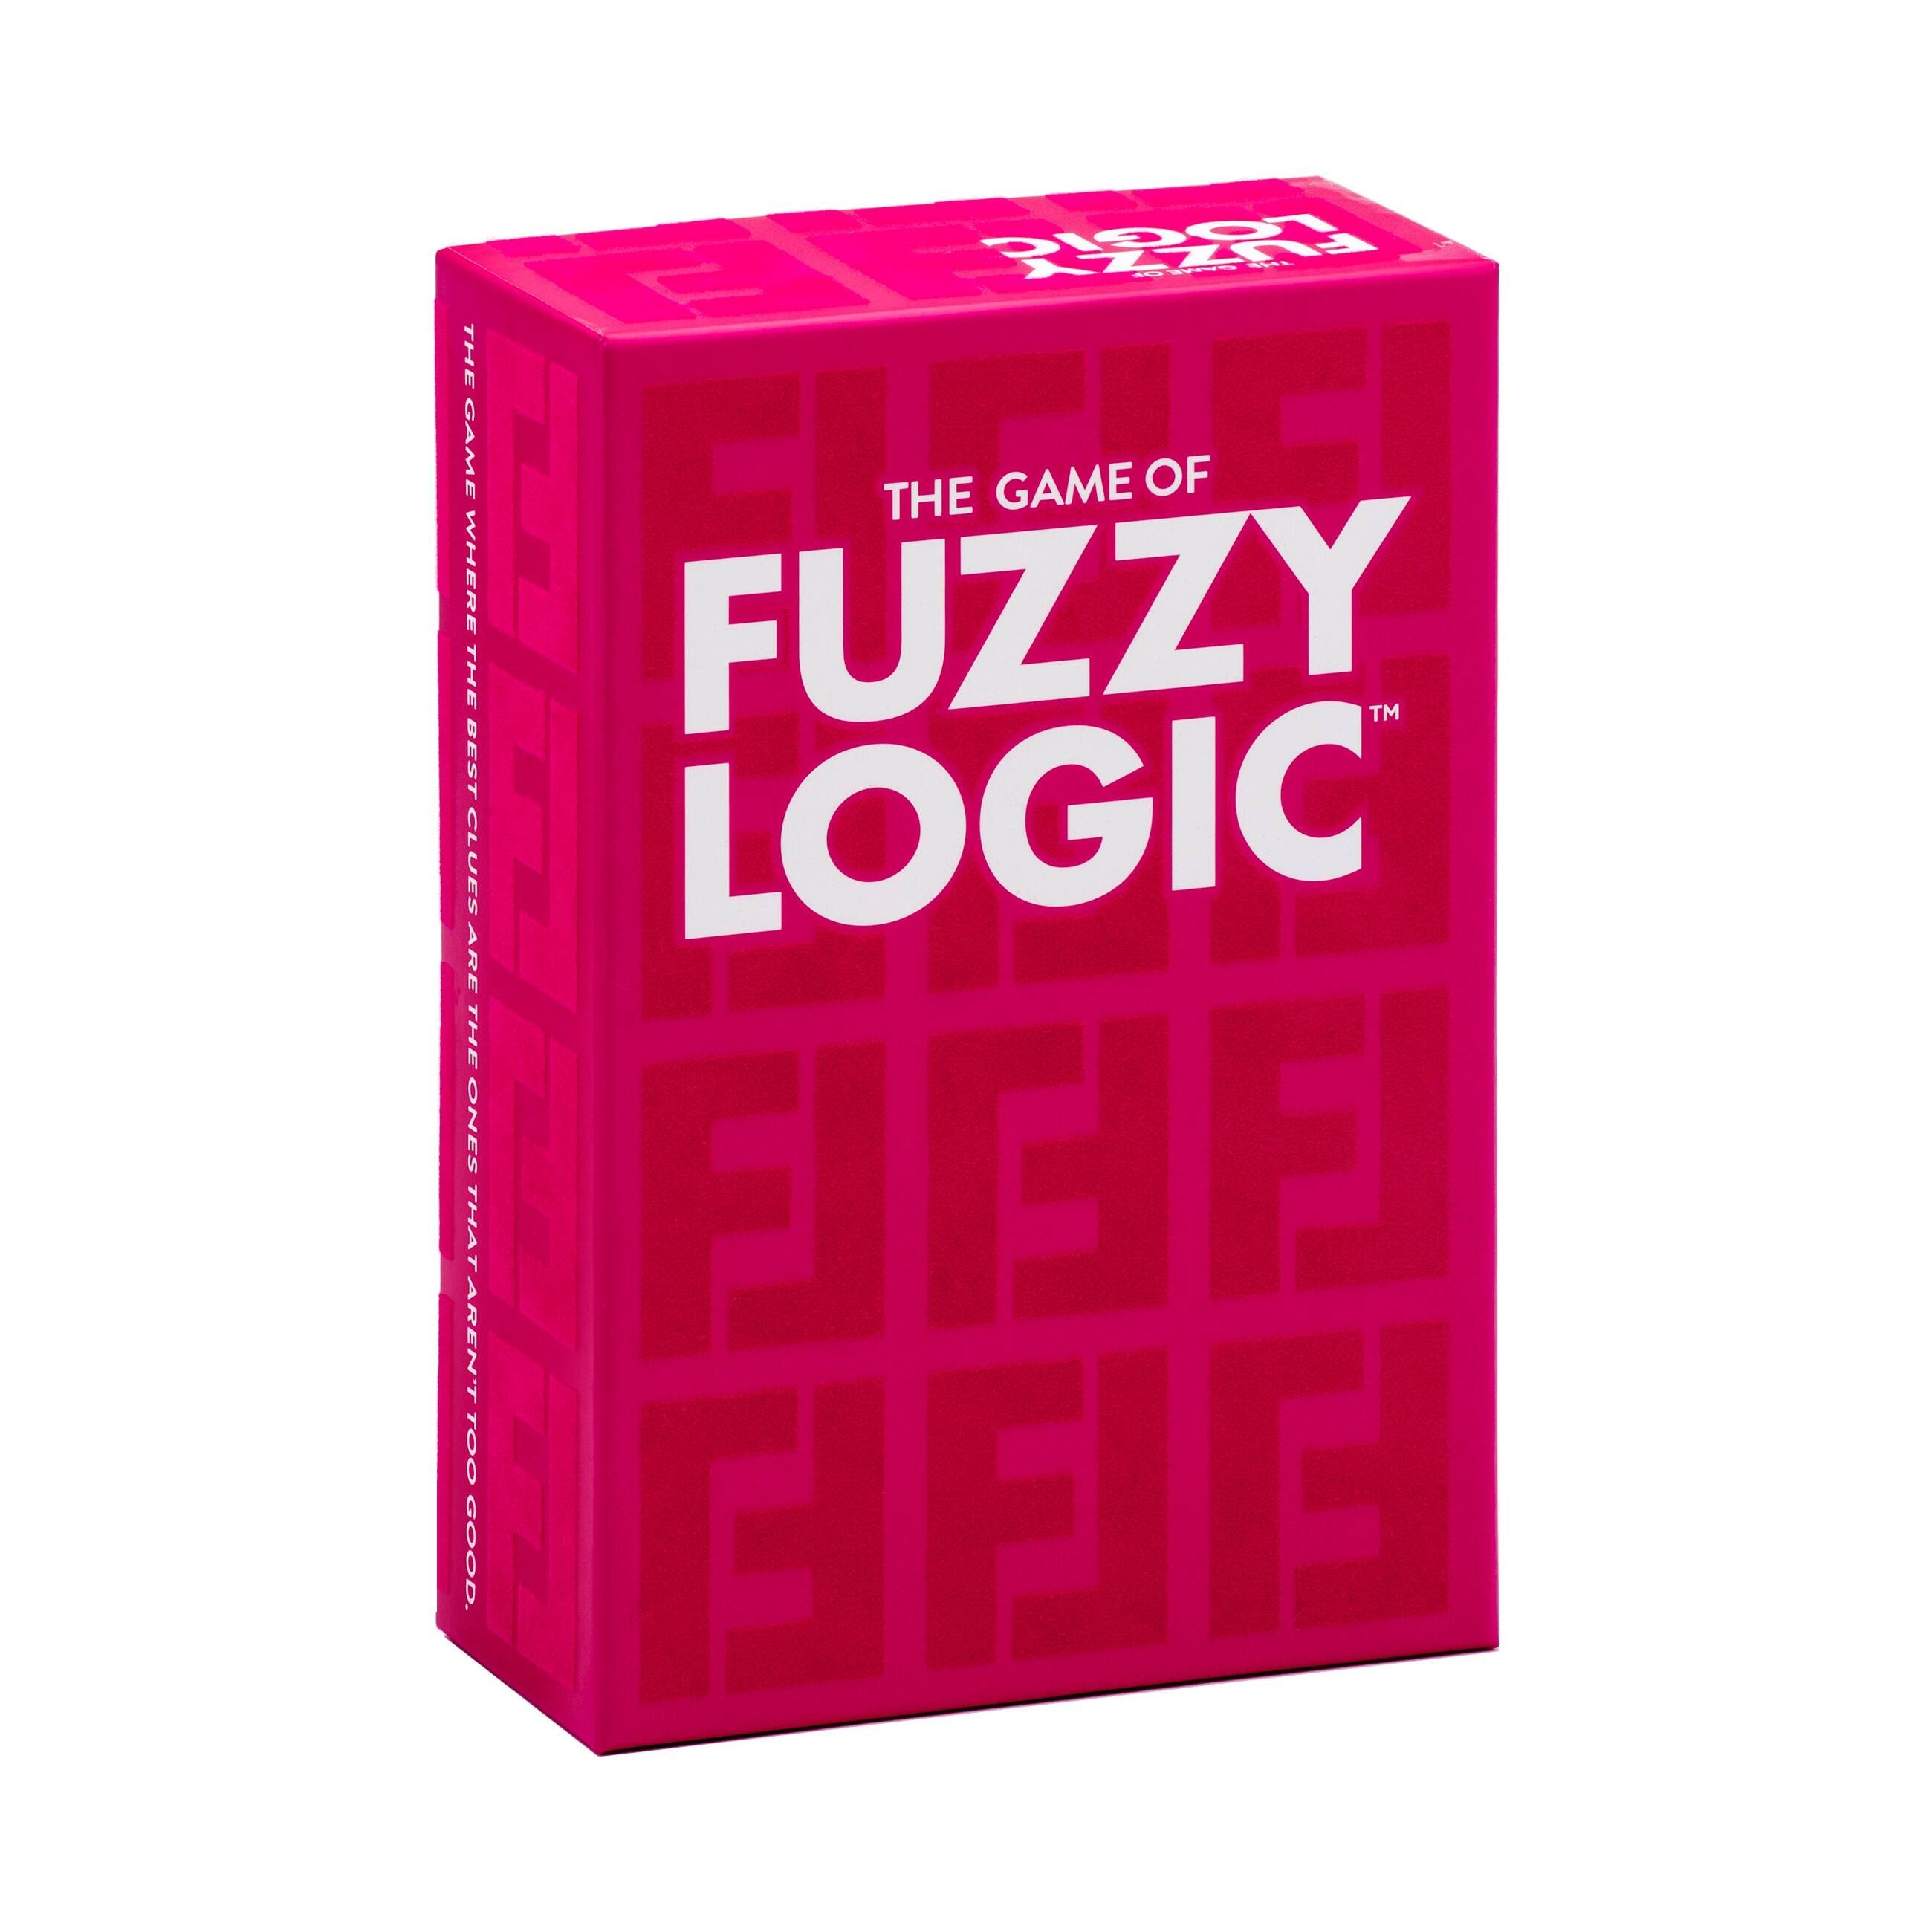 The Game of Fuzzy Logic